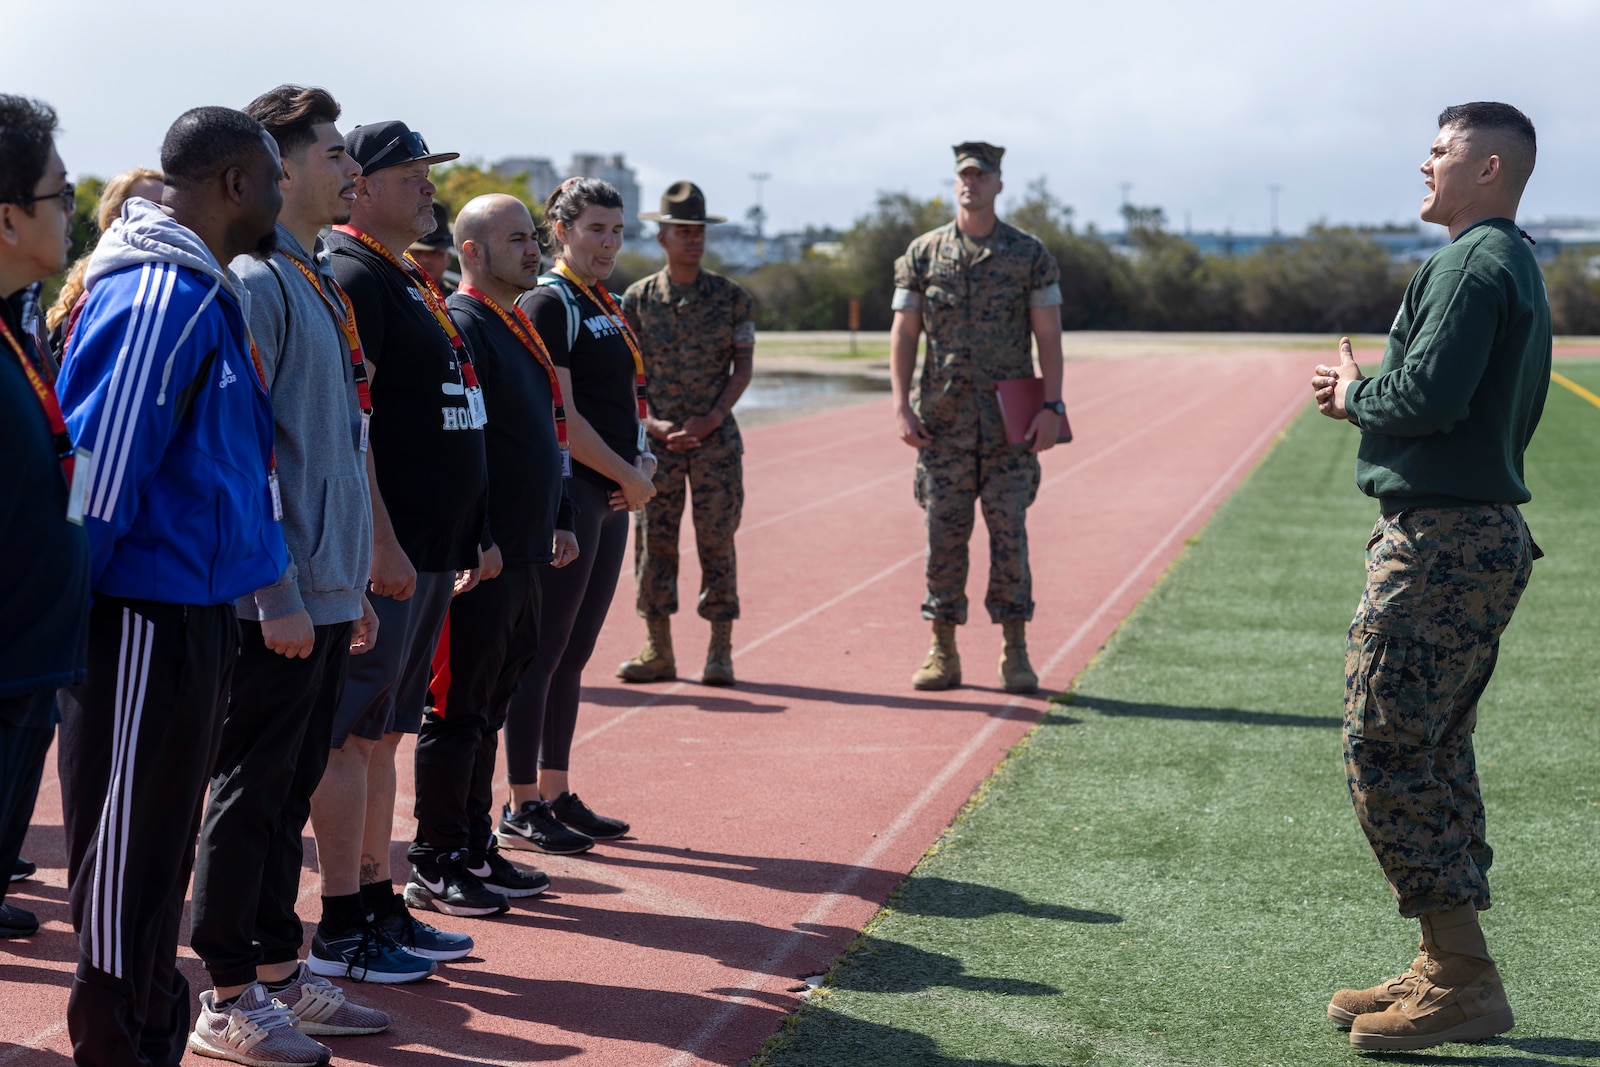 U.S. Marine Corps Staff Sgt. Andre Velez, a chief drill instructor with Receiving Company, Recruit Training Regiment, explains the Marine Corps Combat Fitness Test to educators  during the U.S. Marine Corps Educators' Workshop at Marine Corps Recruit Depot San Diego, California on March 29, 2022. The Educators' Workshop is a five-day program designed to better inform teachers, coaches, counselors and influencers about the benefits and opportunities available during service in the Marine Corps. This allows attendees to return home and provide firsthand experience and knowledge to individuals interested in military service. (U.S. Marine Corps photo by Staff Sgt. Kelsey Dornfeld)